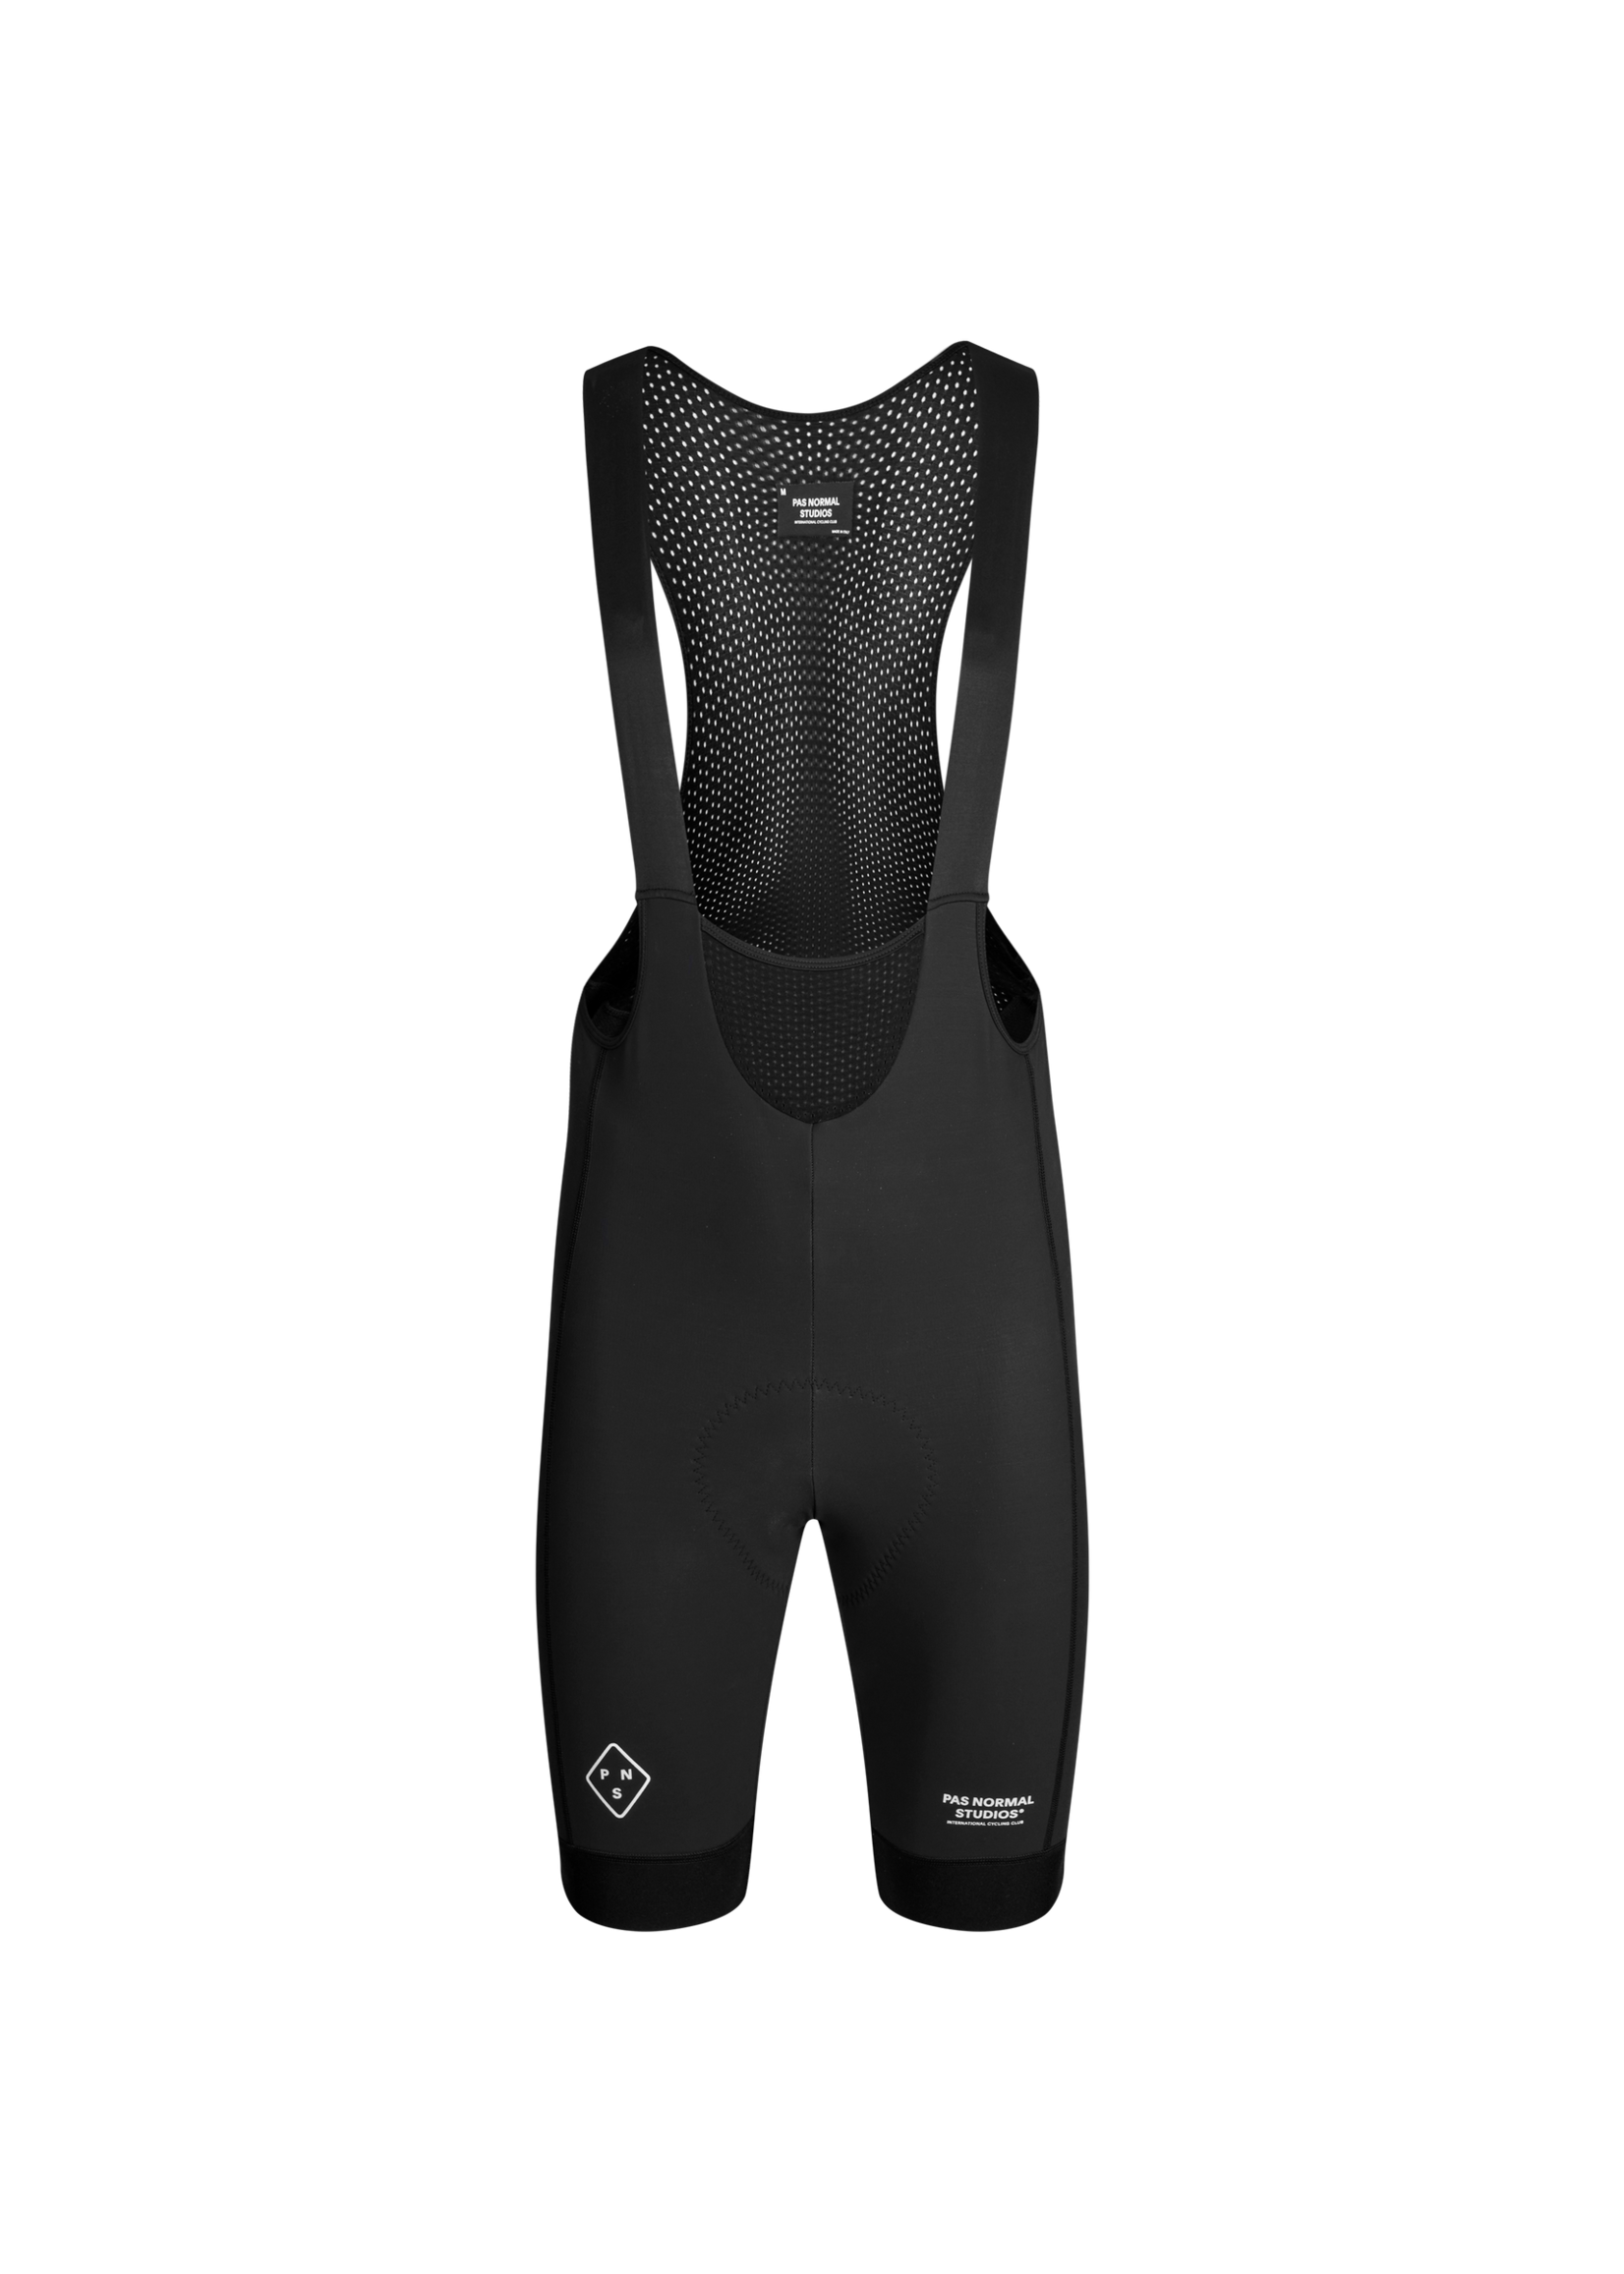 A technical winter bib for fast-paced training and racing. - Bataia